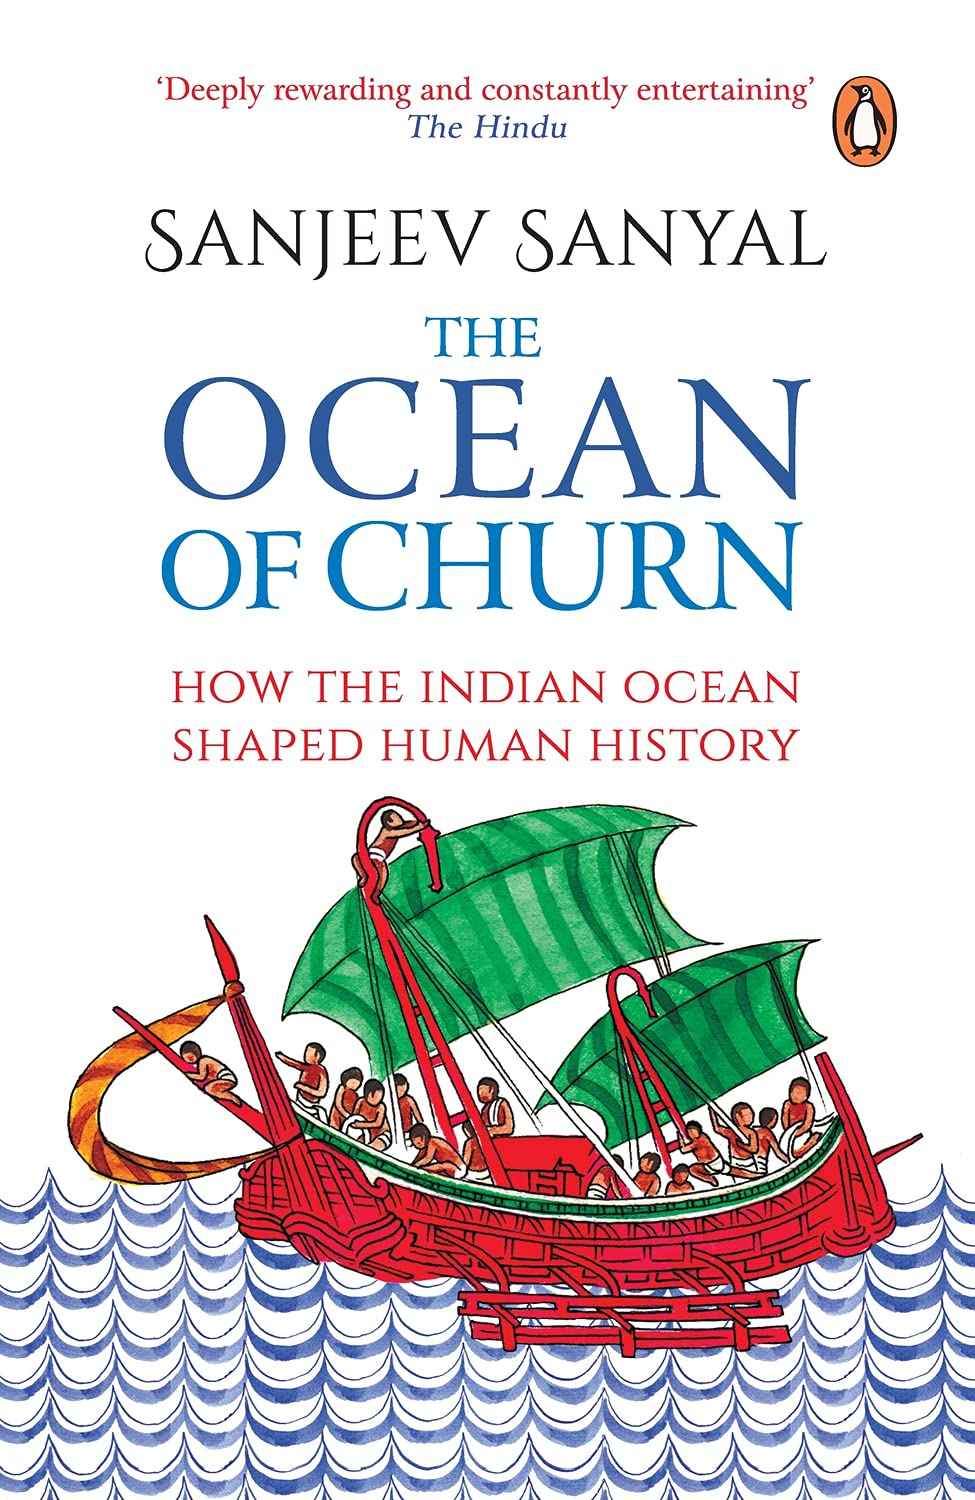 The Ocean of Churn: How the Indian Ocean Shaped Human History by Sanjeev Sanyal 
